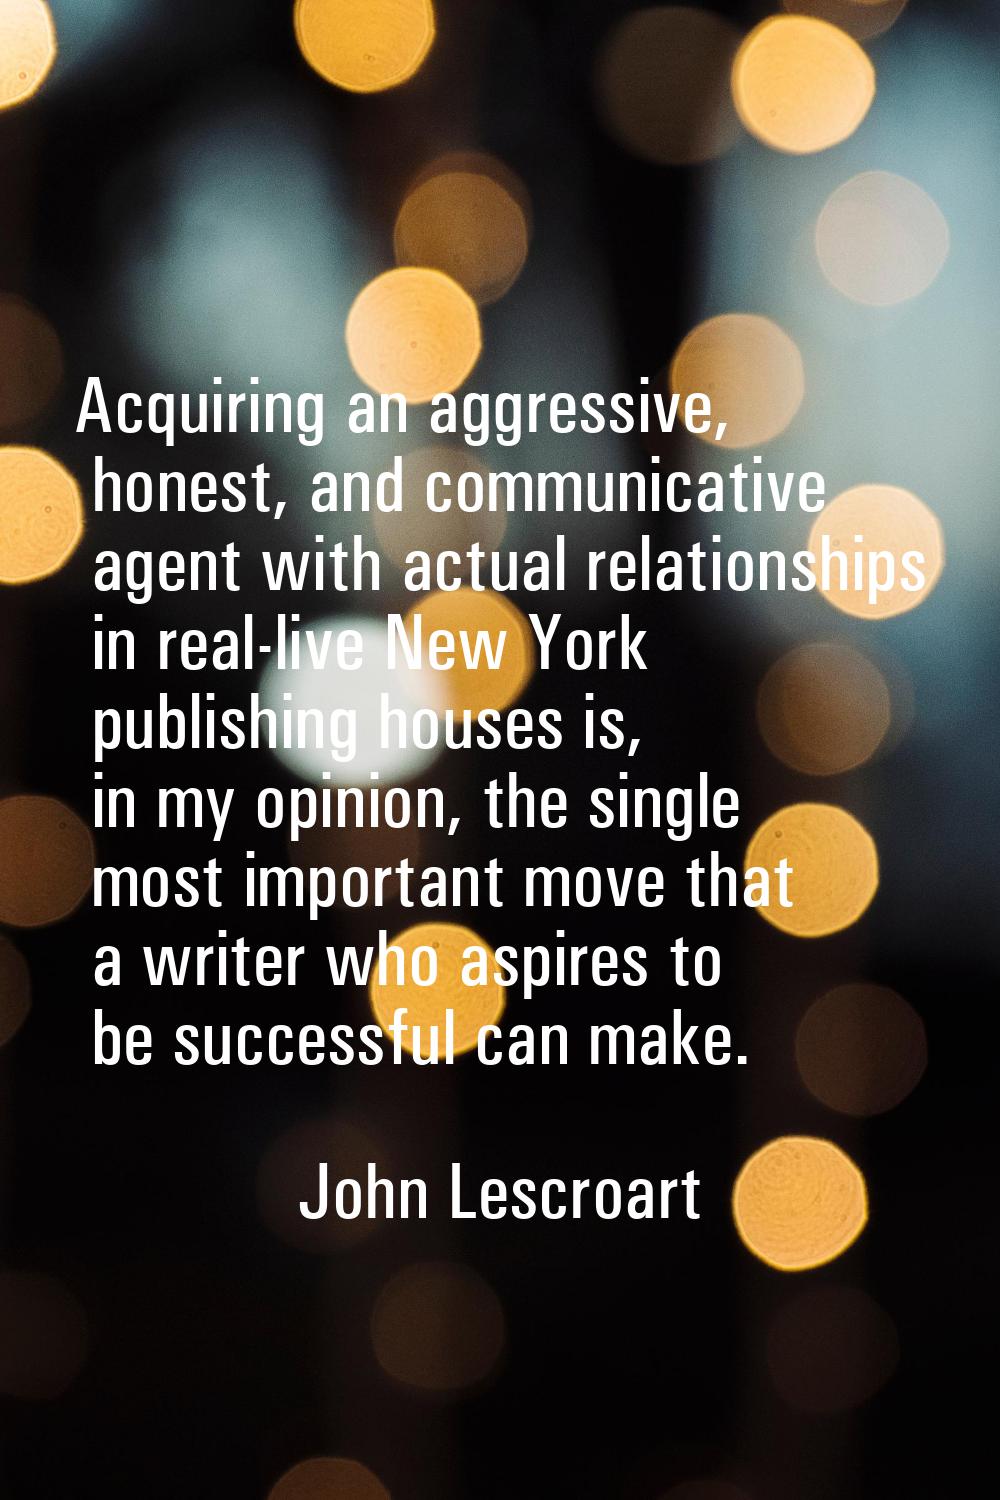 Acquiring an aggressive, honest, and communicative agent with actual relationships in real-live New